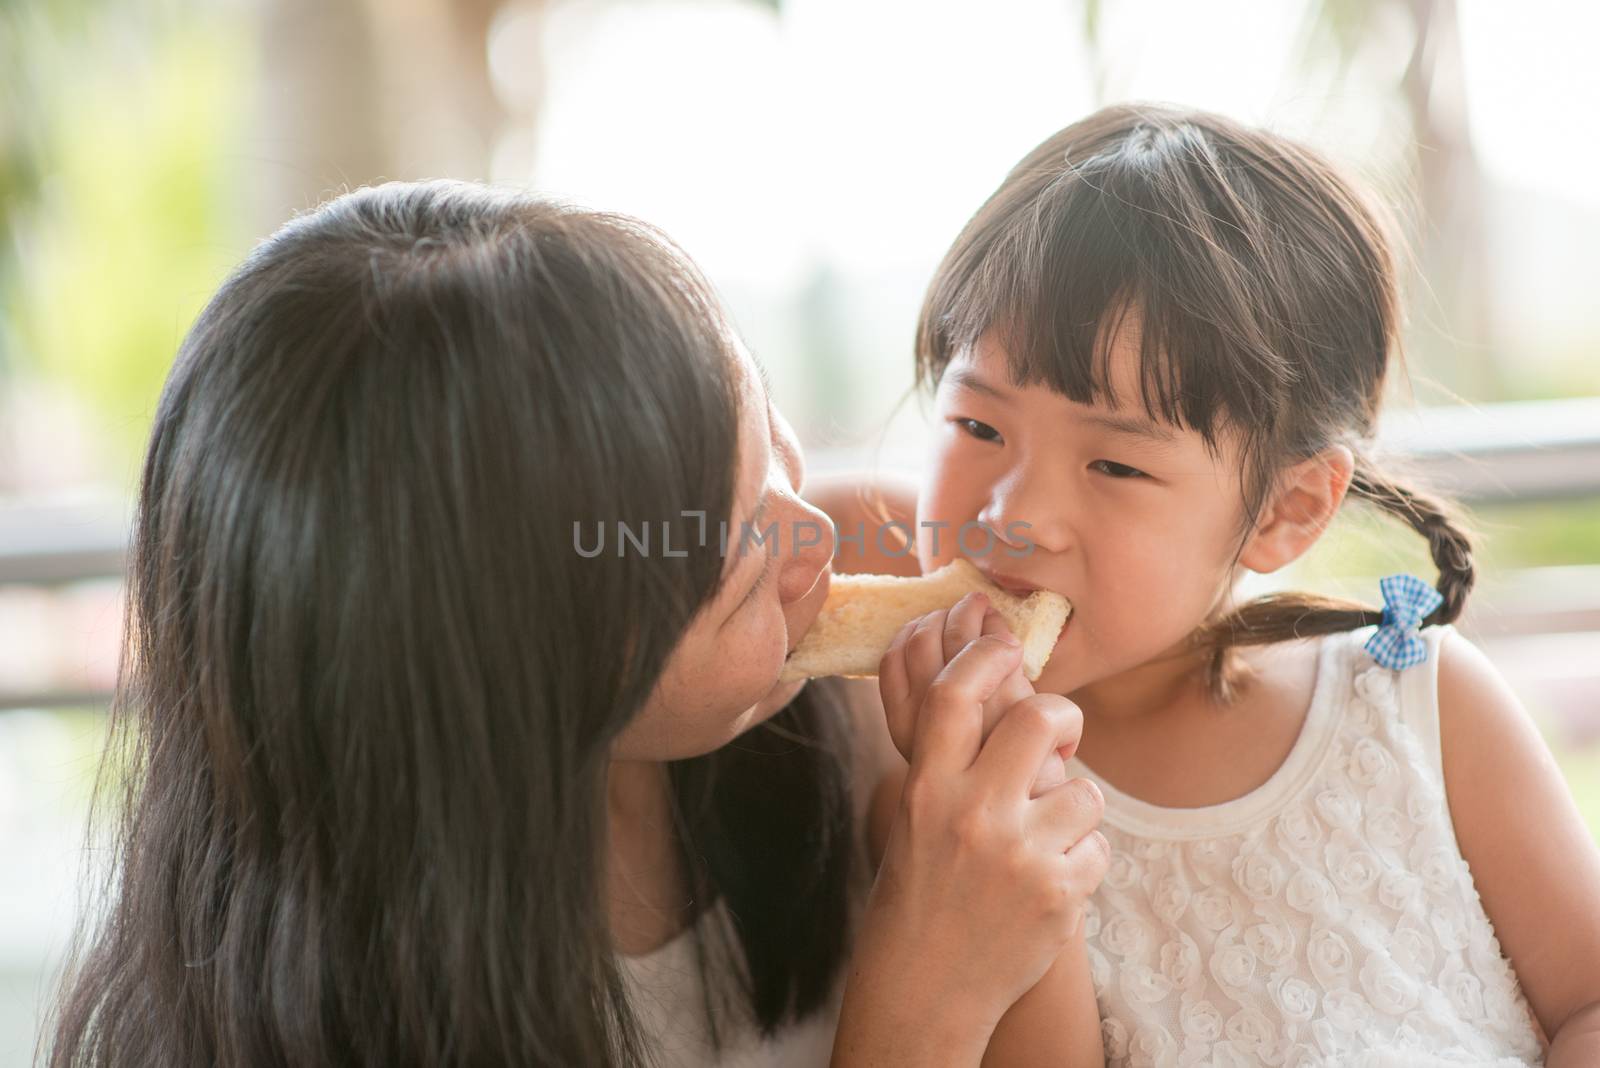 Cute Asian child eating and sharing butter toast with mom at cafe. Outdoor family lifestyle with natural light.